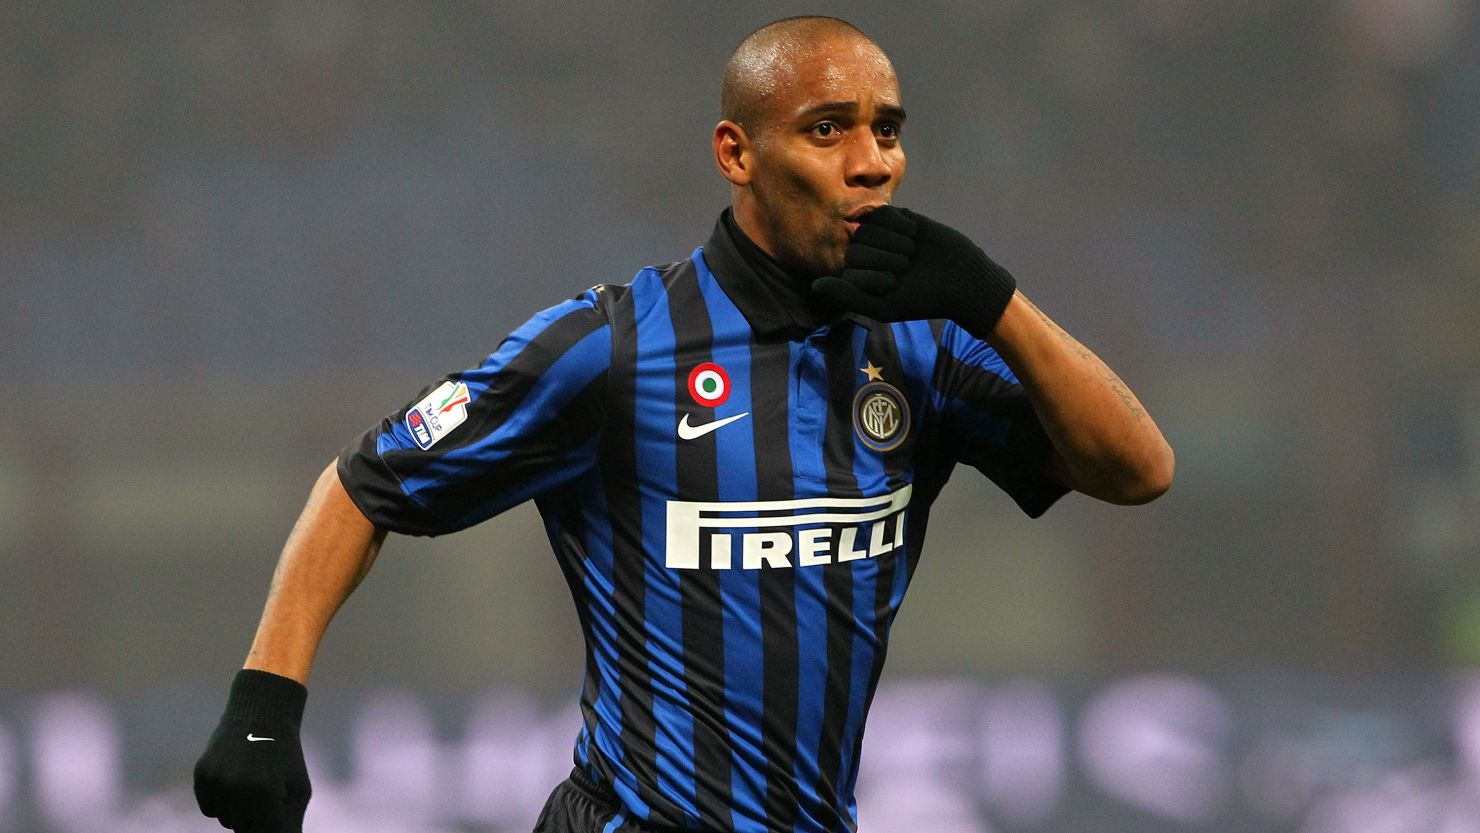 Maicon celebrates scoring Inter's opening goal in their 2-1 Italian Cup win over Genoa.